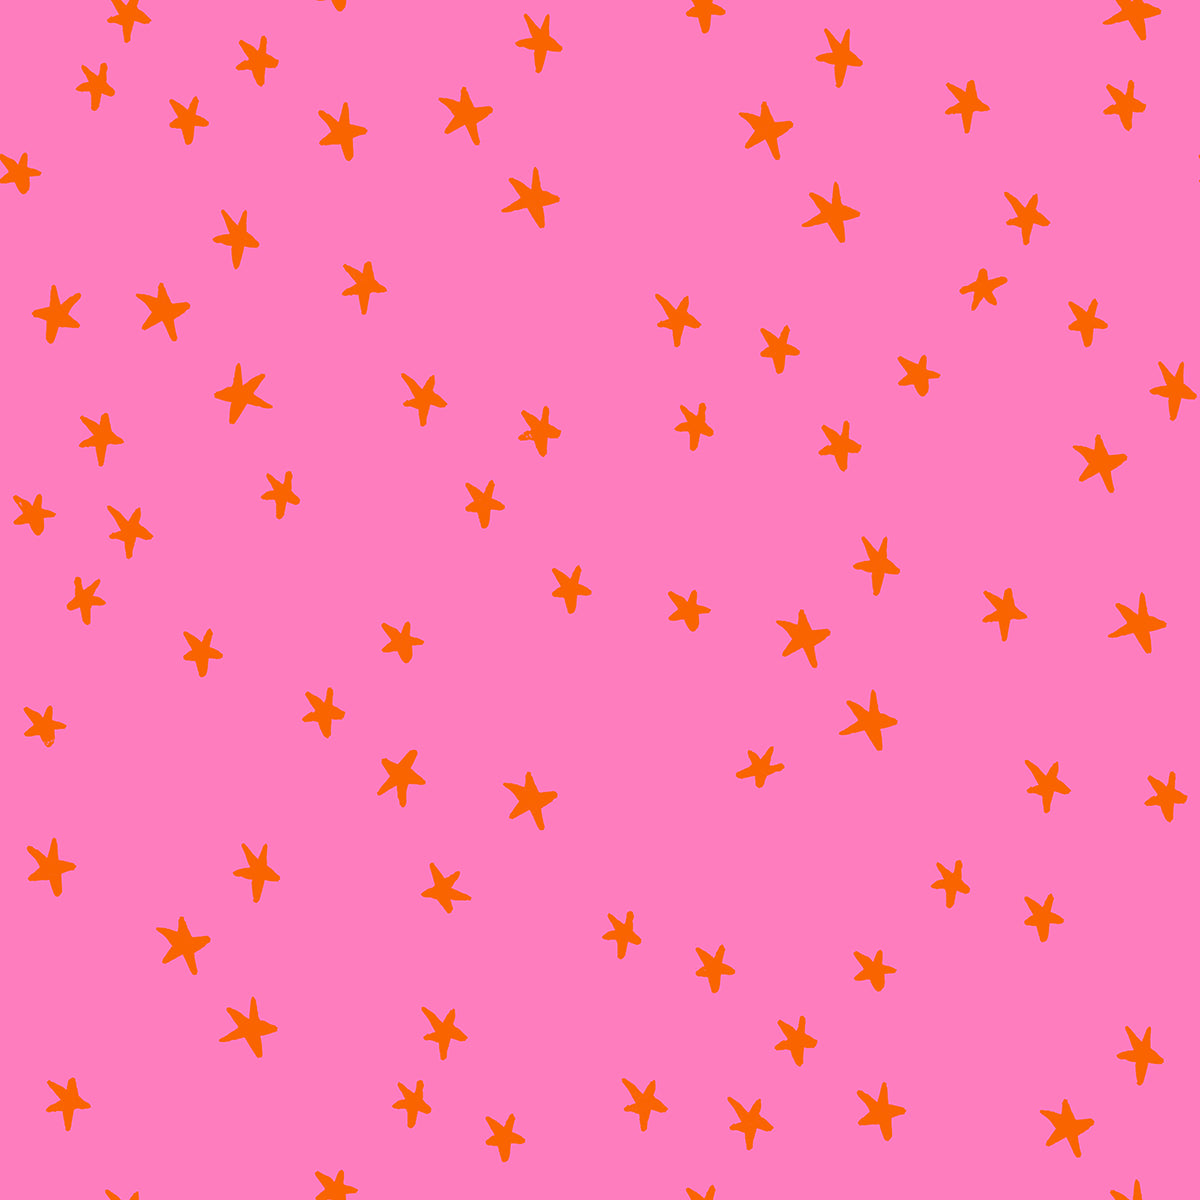 Starry by Alexia Abegg : Starry - Vivid Pink RS4109 41